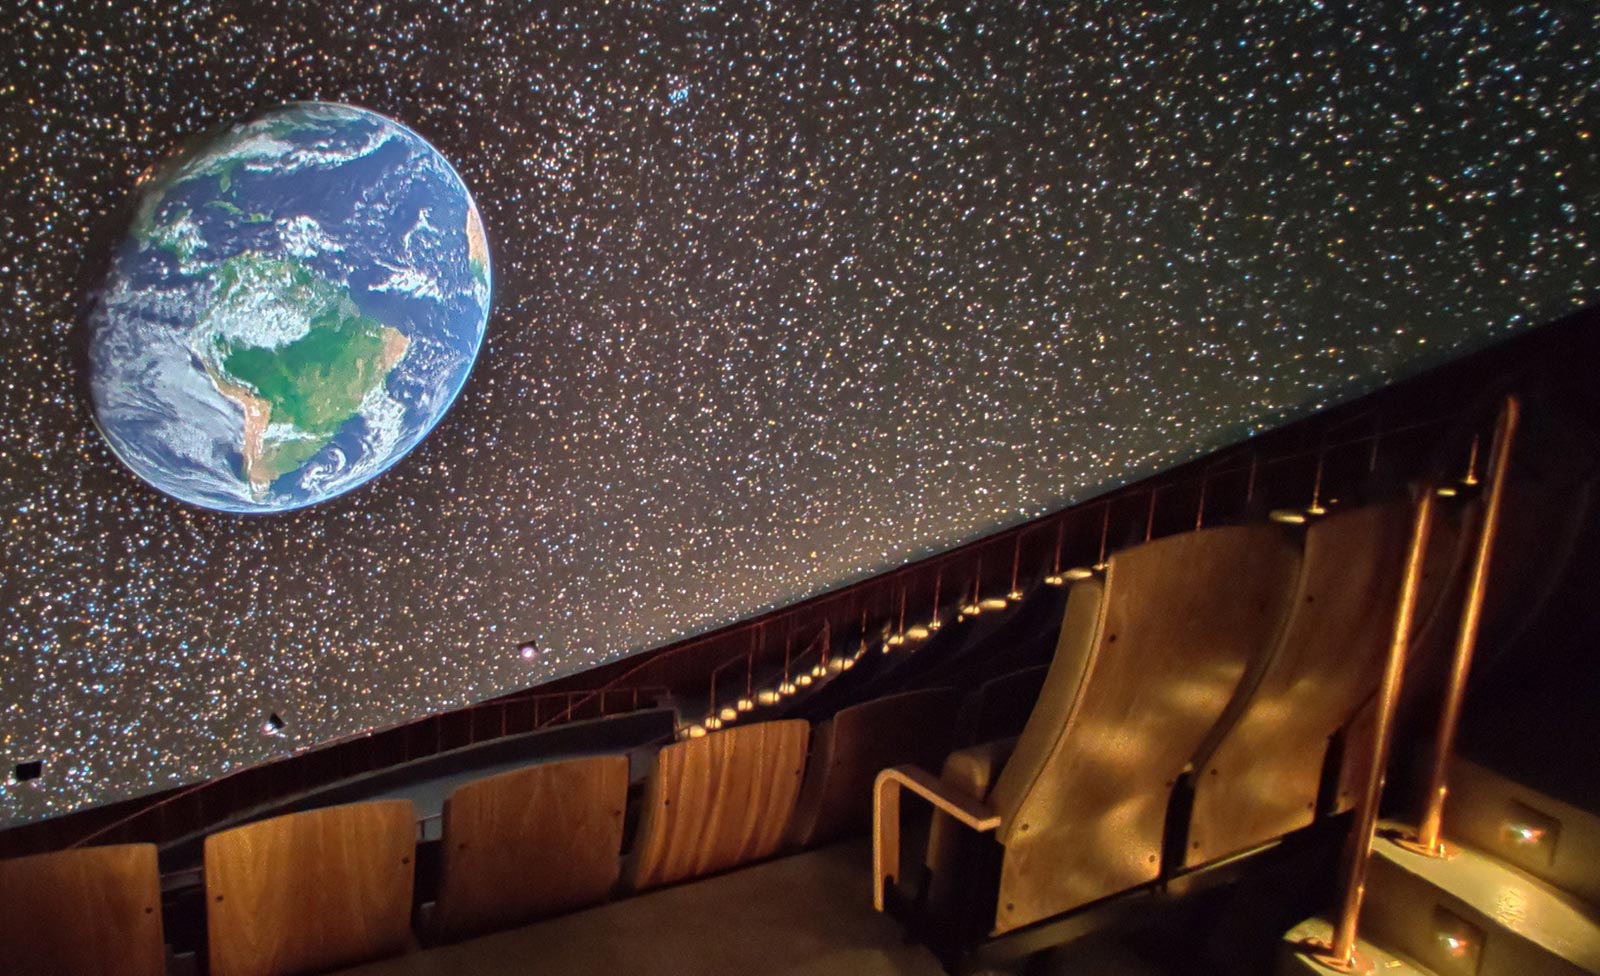 Digistar 7 imagery on the dome at Tycho Brahe Planetarium in Copenhagen, Denmark